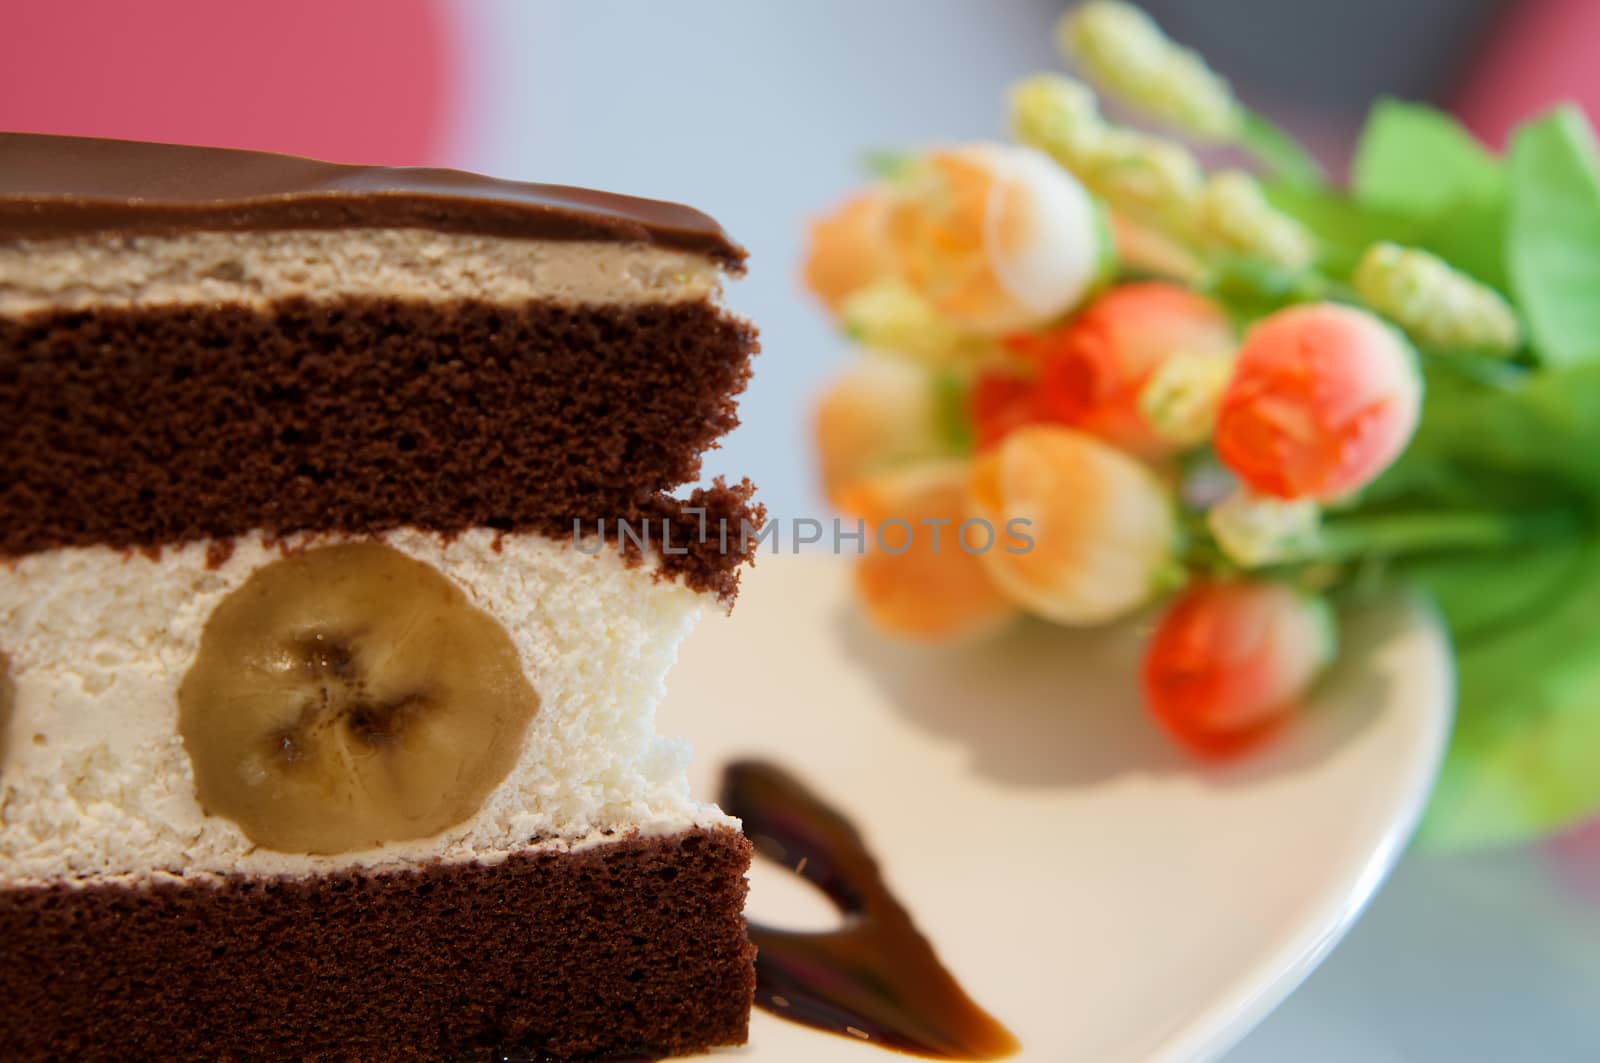 Banana chocolate with flower background by ninun